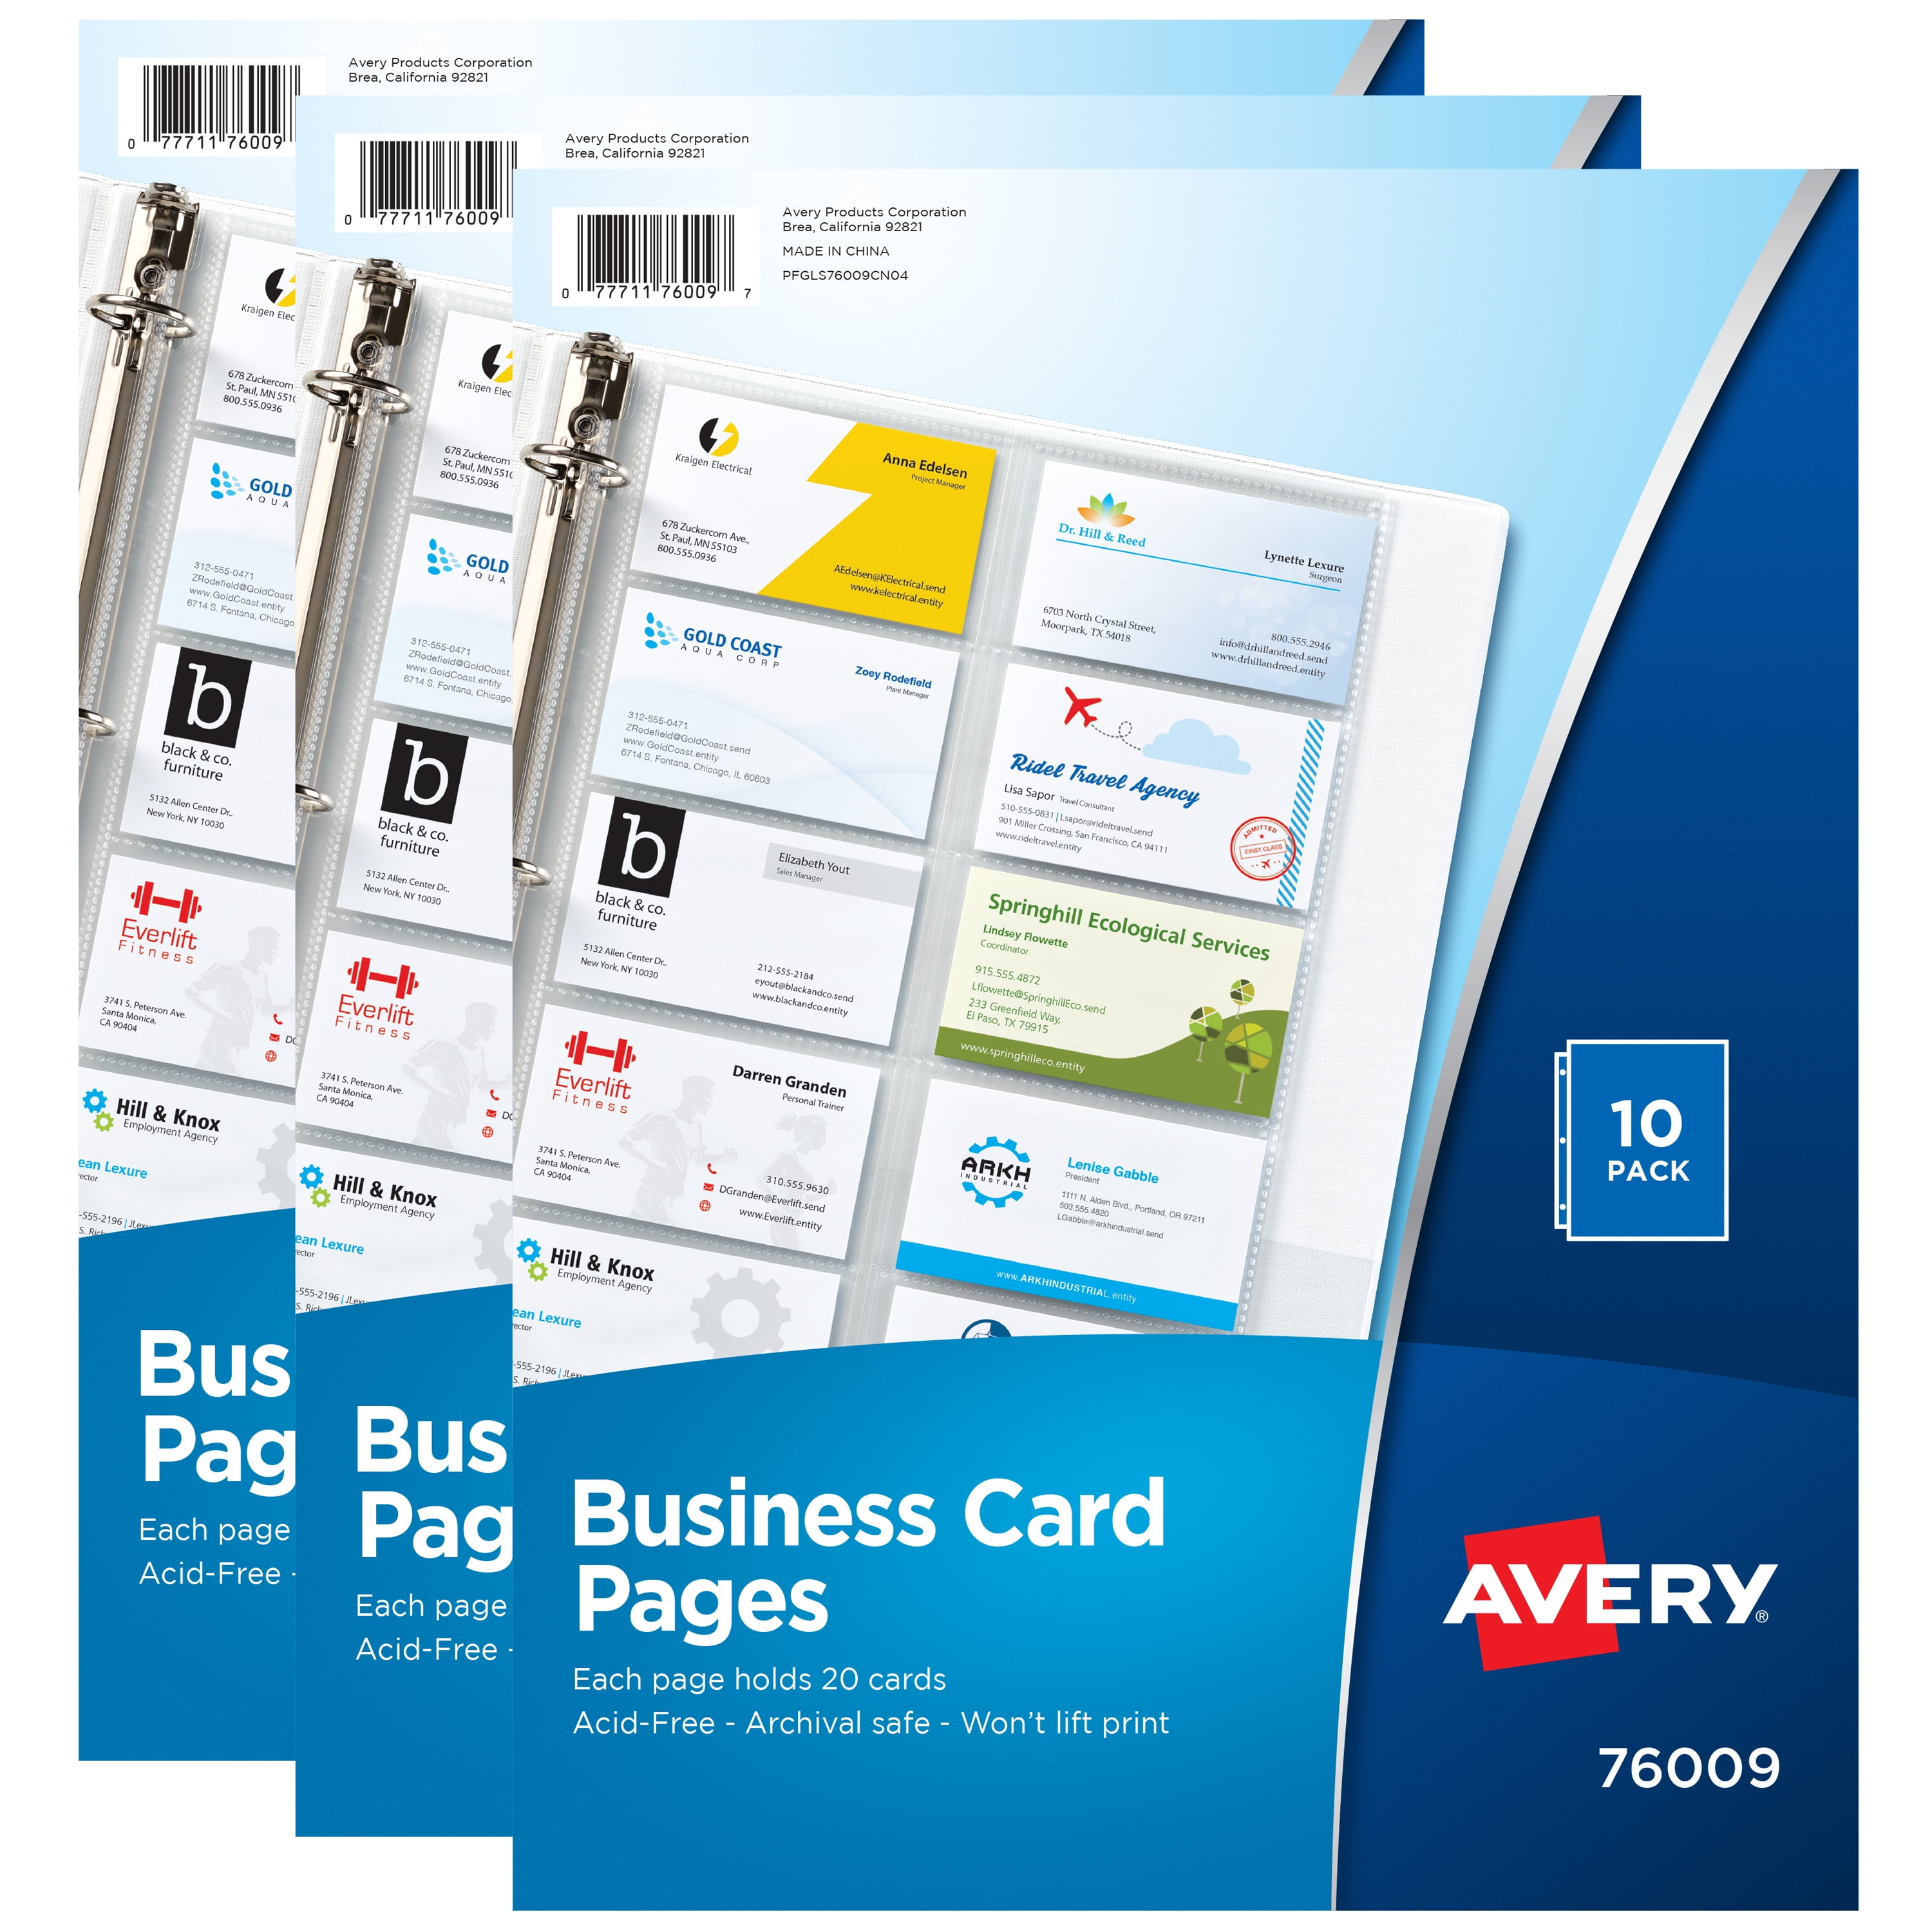 Avery 76009 10-Pack/200 Card Slots Business Card Pages Three-Hole Punched 